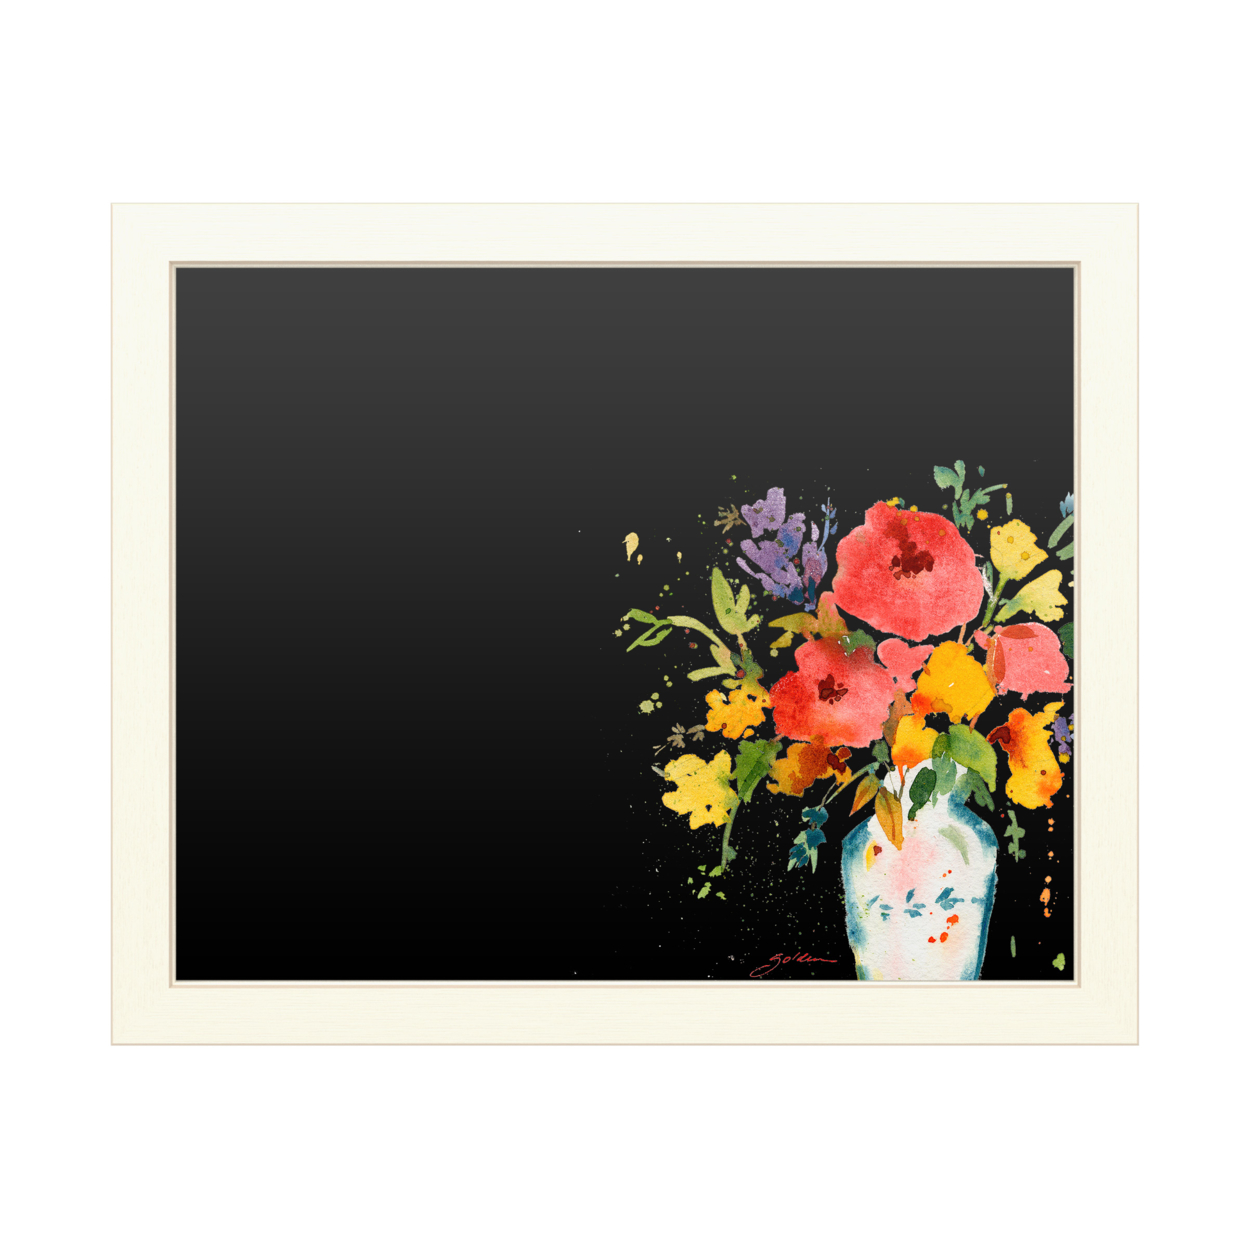 16 X 20 Chalk Board With Printed Artwork - Sheila Golden White Vase With Bright Flowers White Board - Ready To Hang Chalkboard